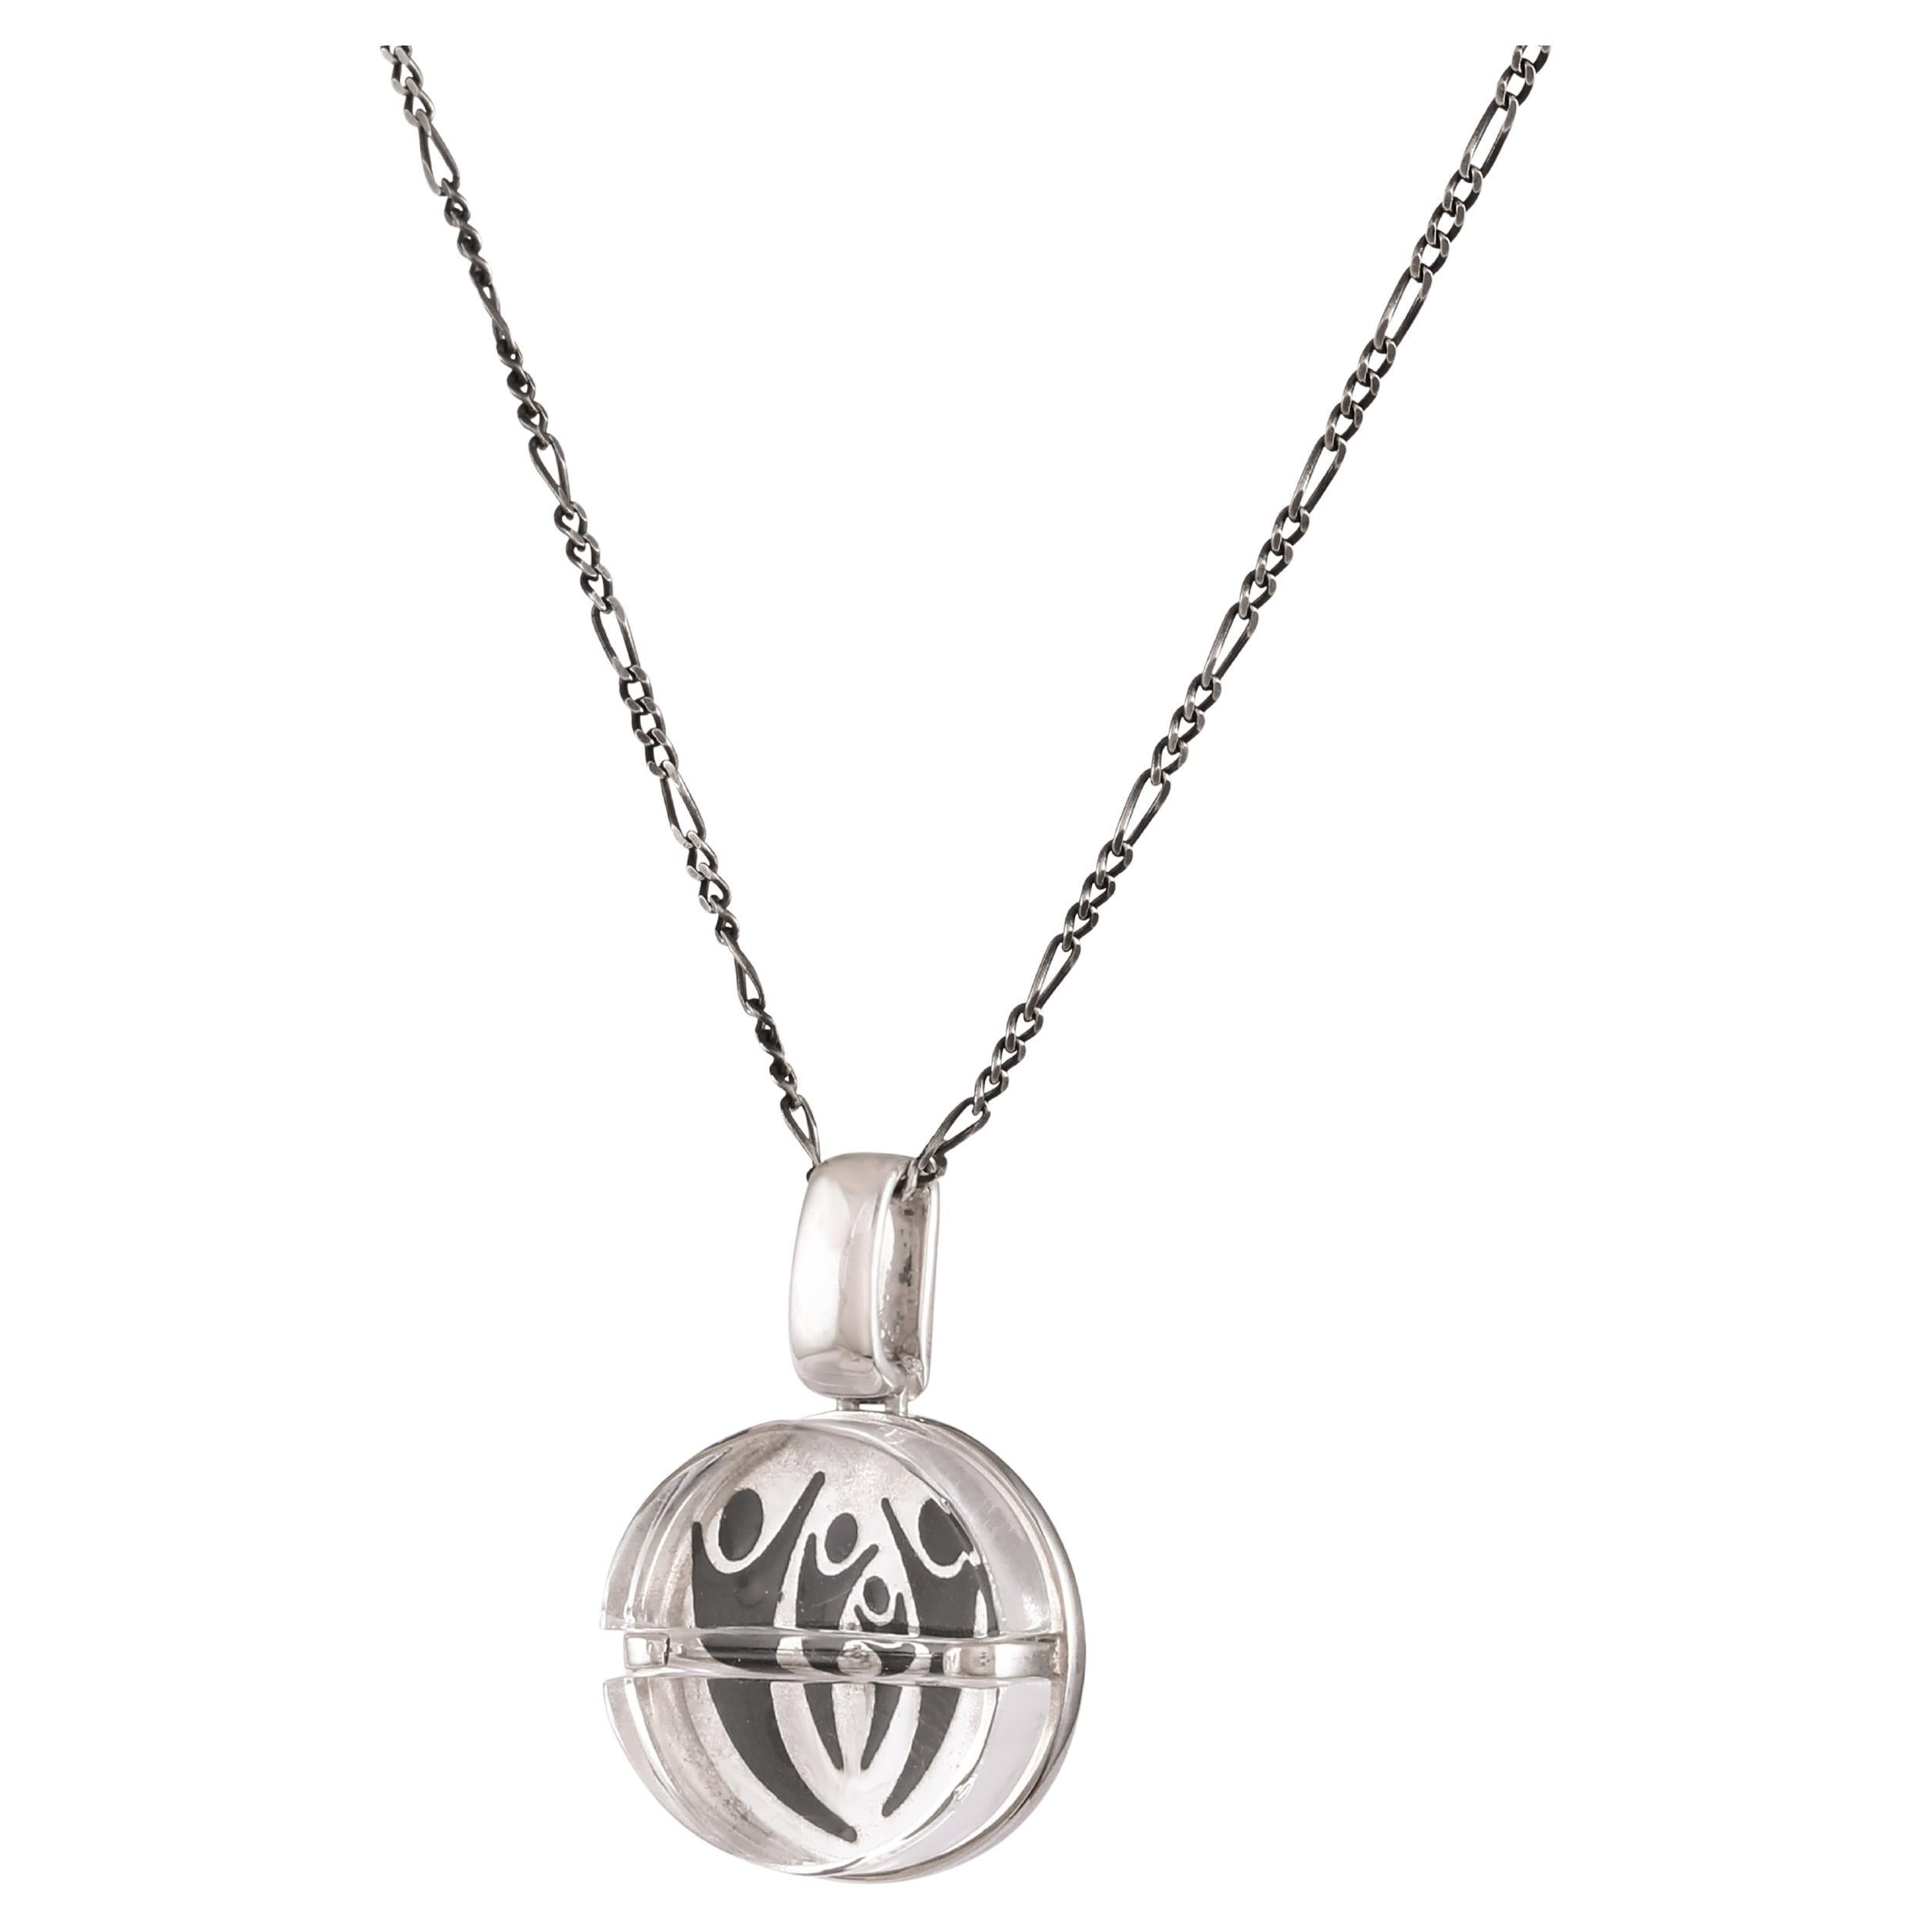 Tichu Bliss Pill Pendant & Chain in Sterling Silver & Crystal in Silver Finish 